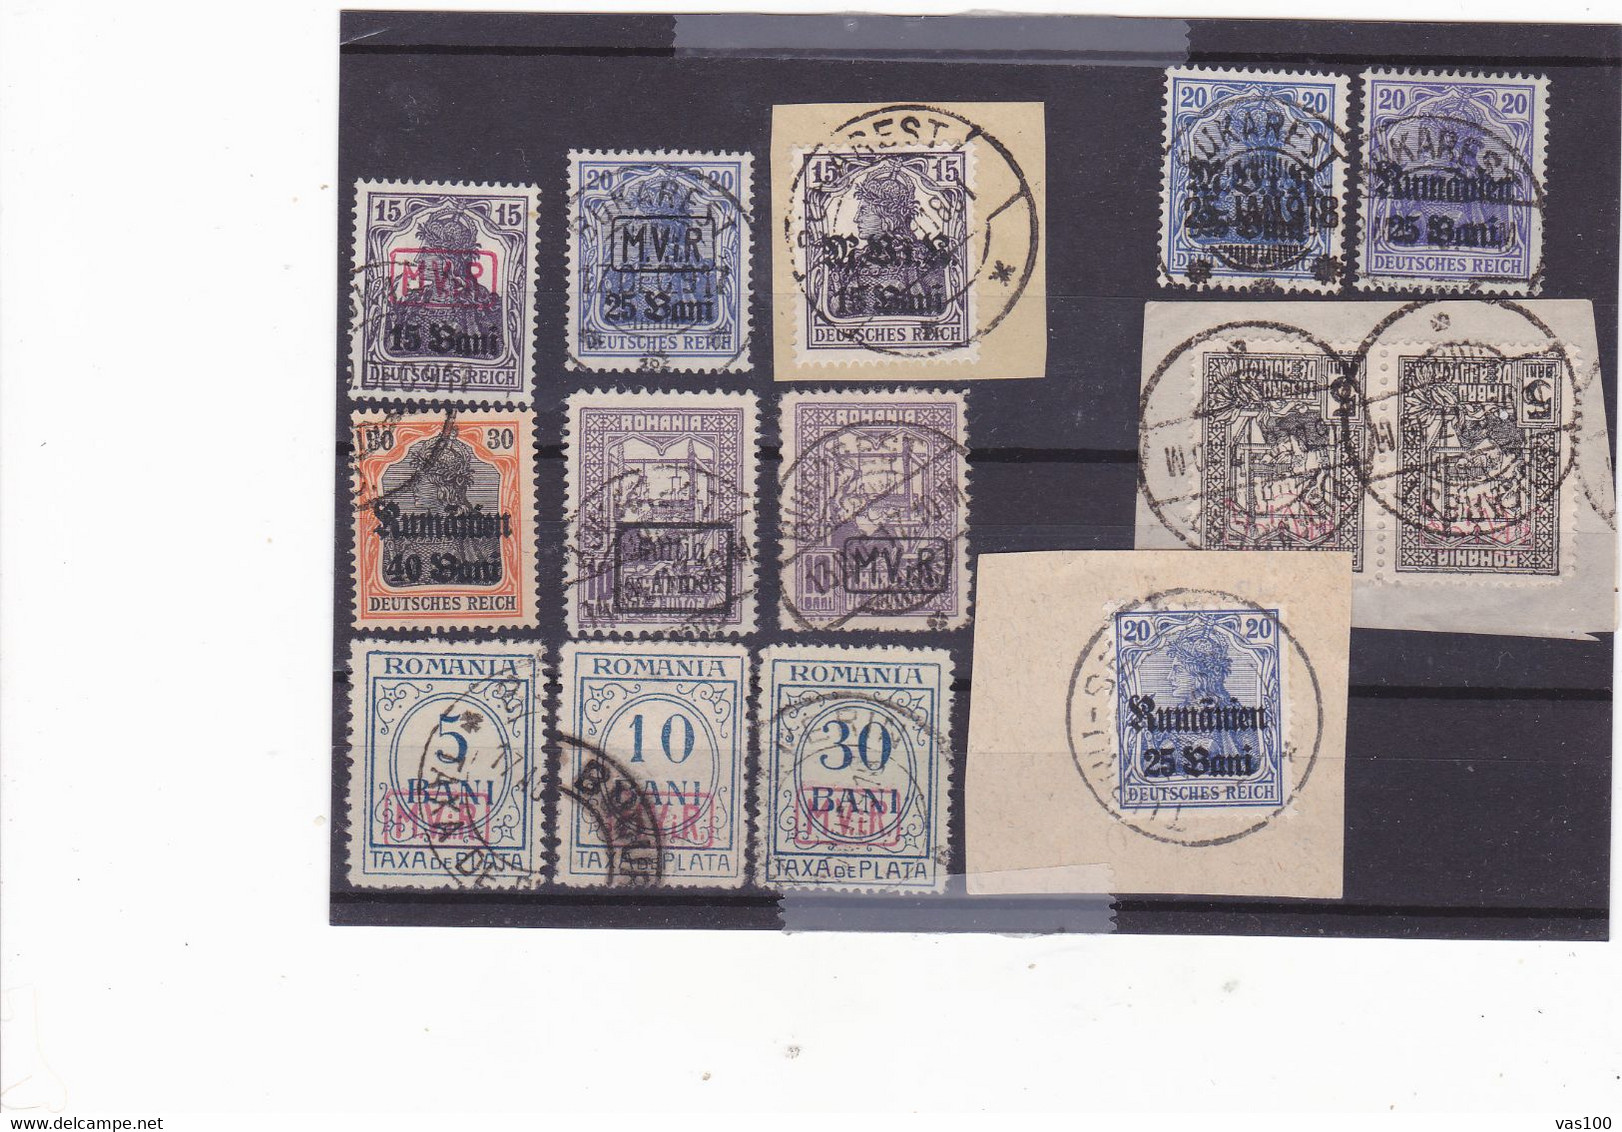 Germany Occupation Romania In WWI 1917-8 OVERPRINT LOT14 STAMPS - Occupations